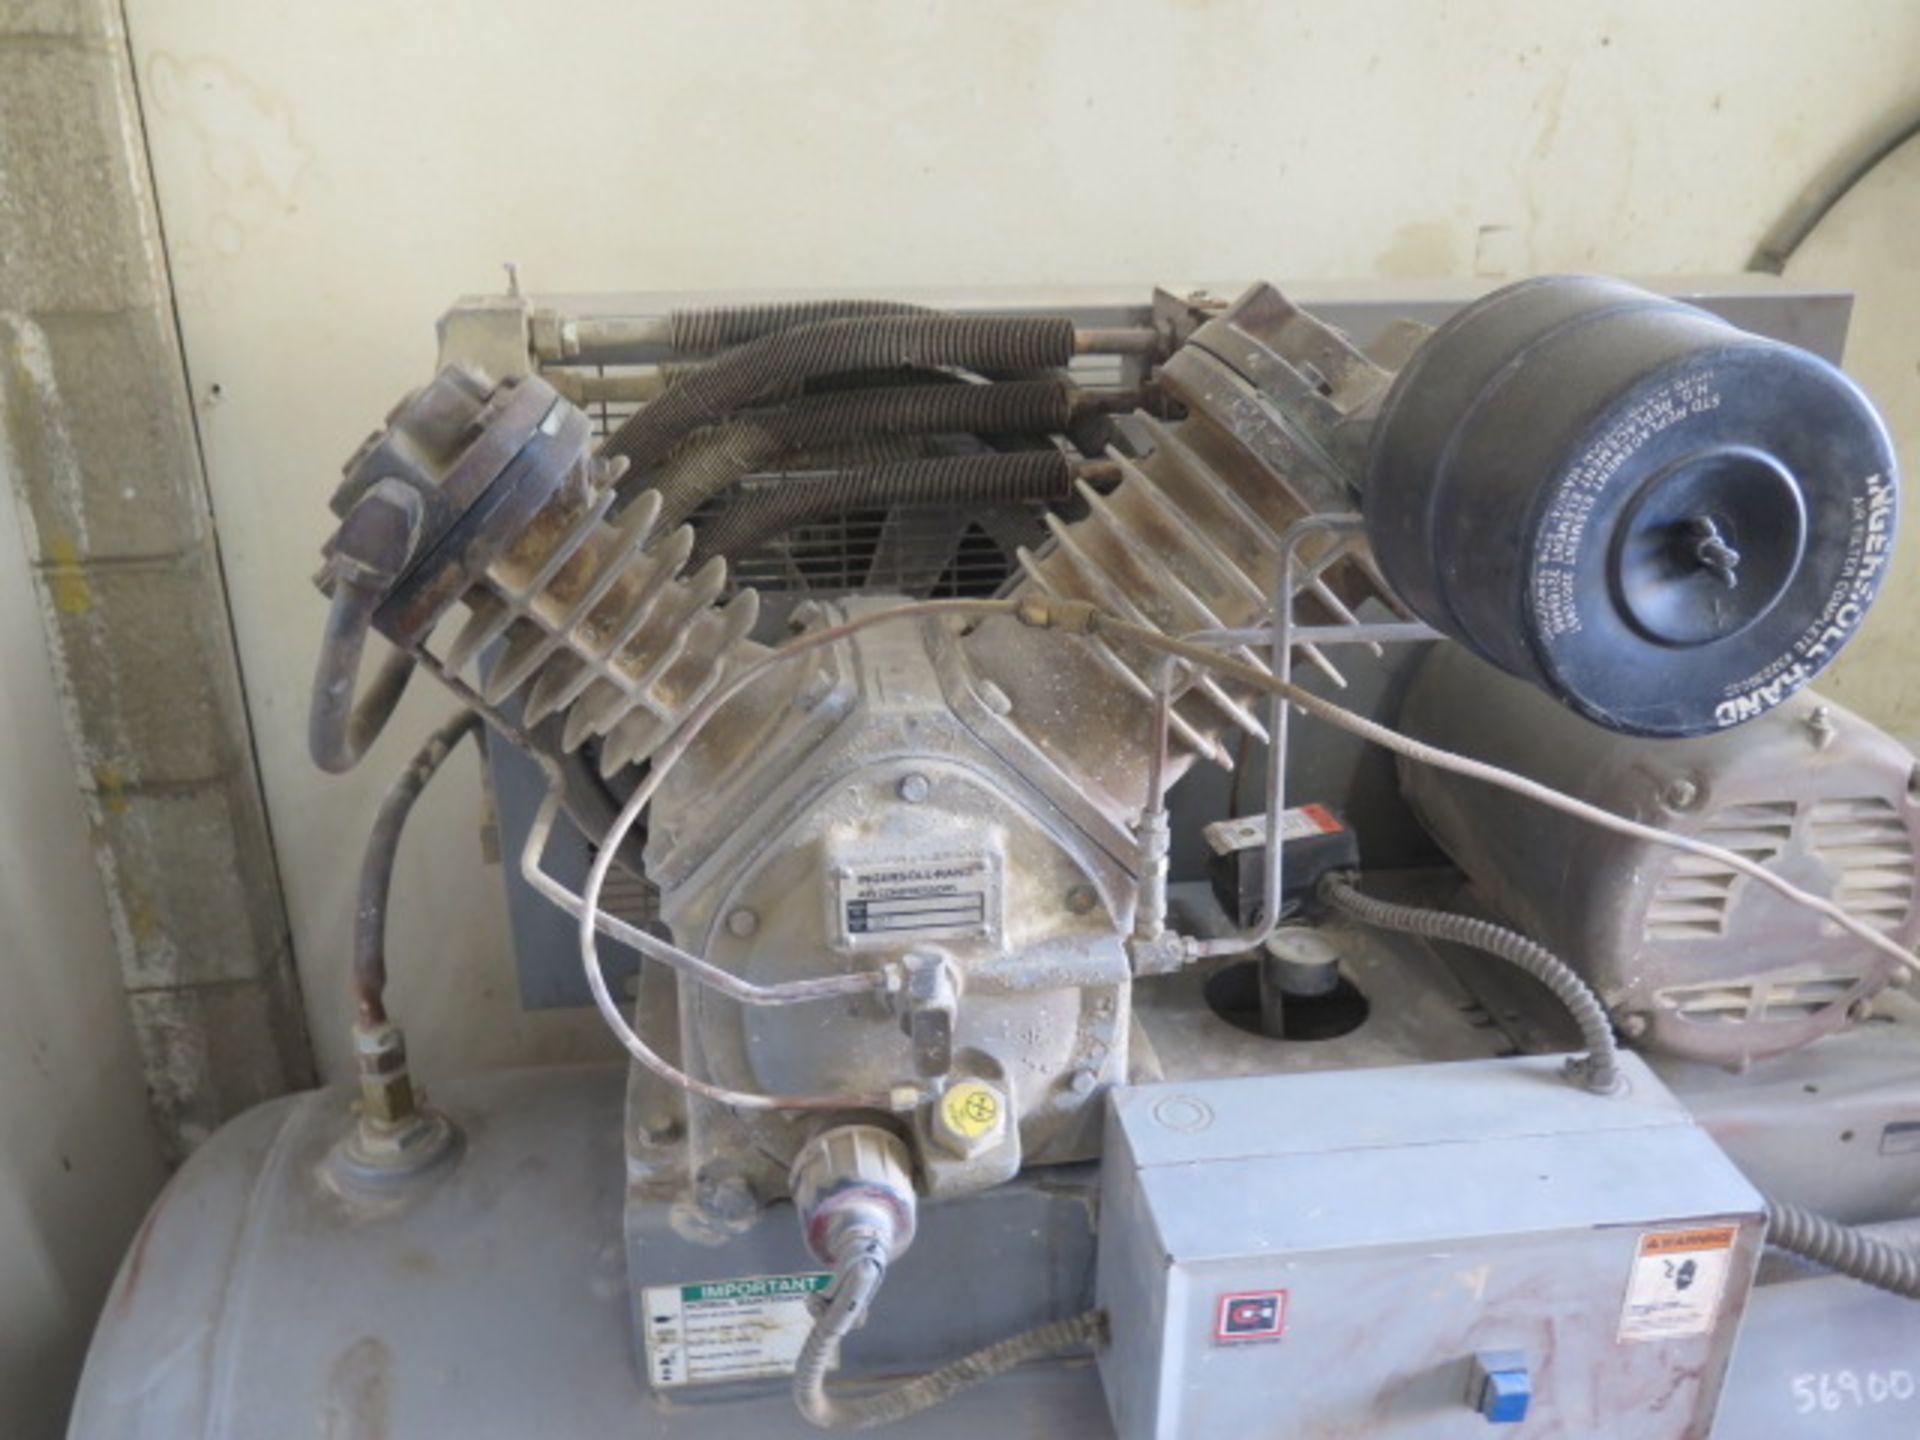 Ingersoll Rand T30 10/7.5Hp Horizontal Air Compressor w/ 2-Stage Pump, 80 Gallon SOLD AS IS - Image 4 of 7